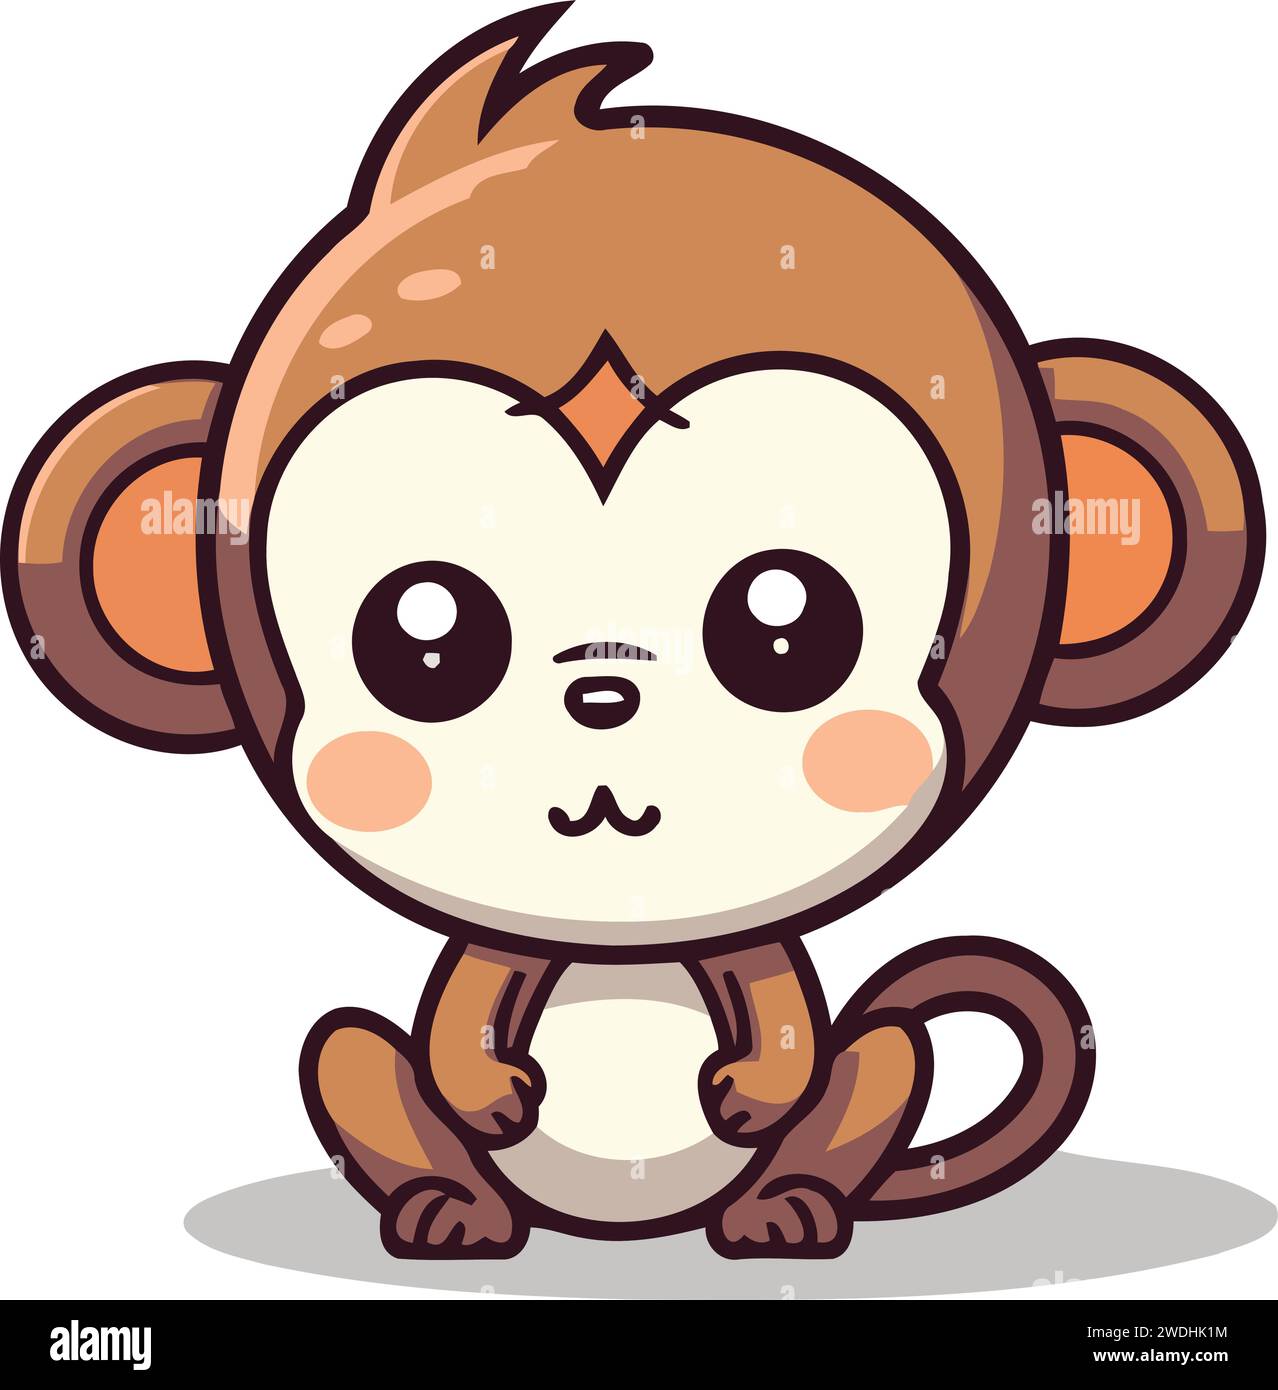 The monkey winks the animal is hanging on the Vector Image | Monkey drawing  cute, Monkey illustration, Monkey drawing